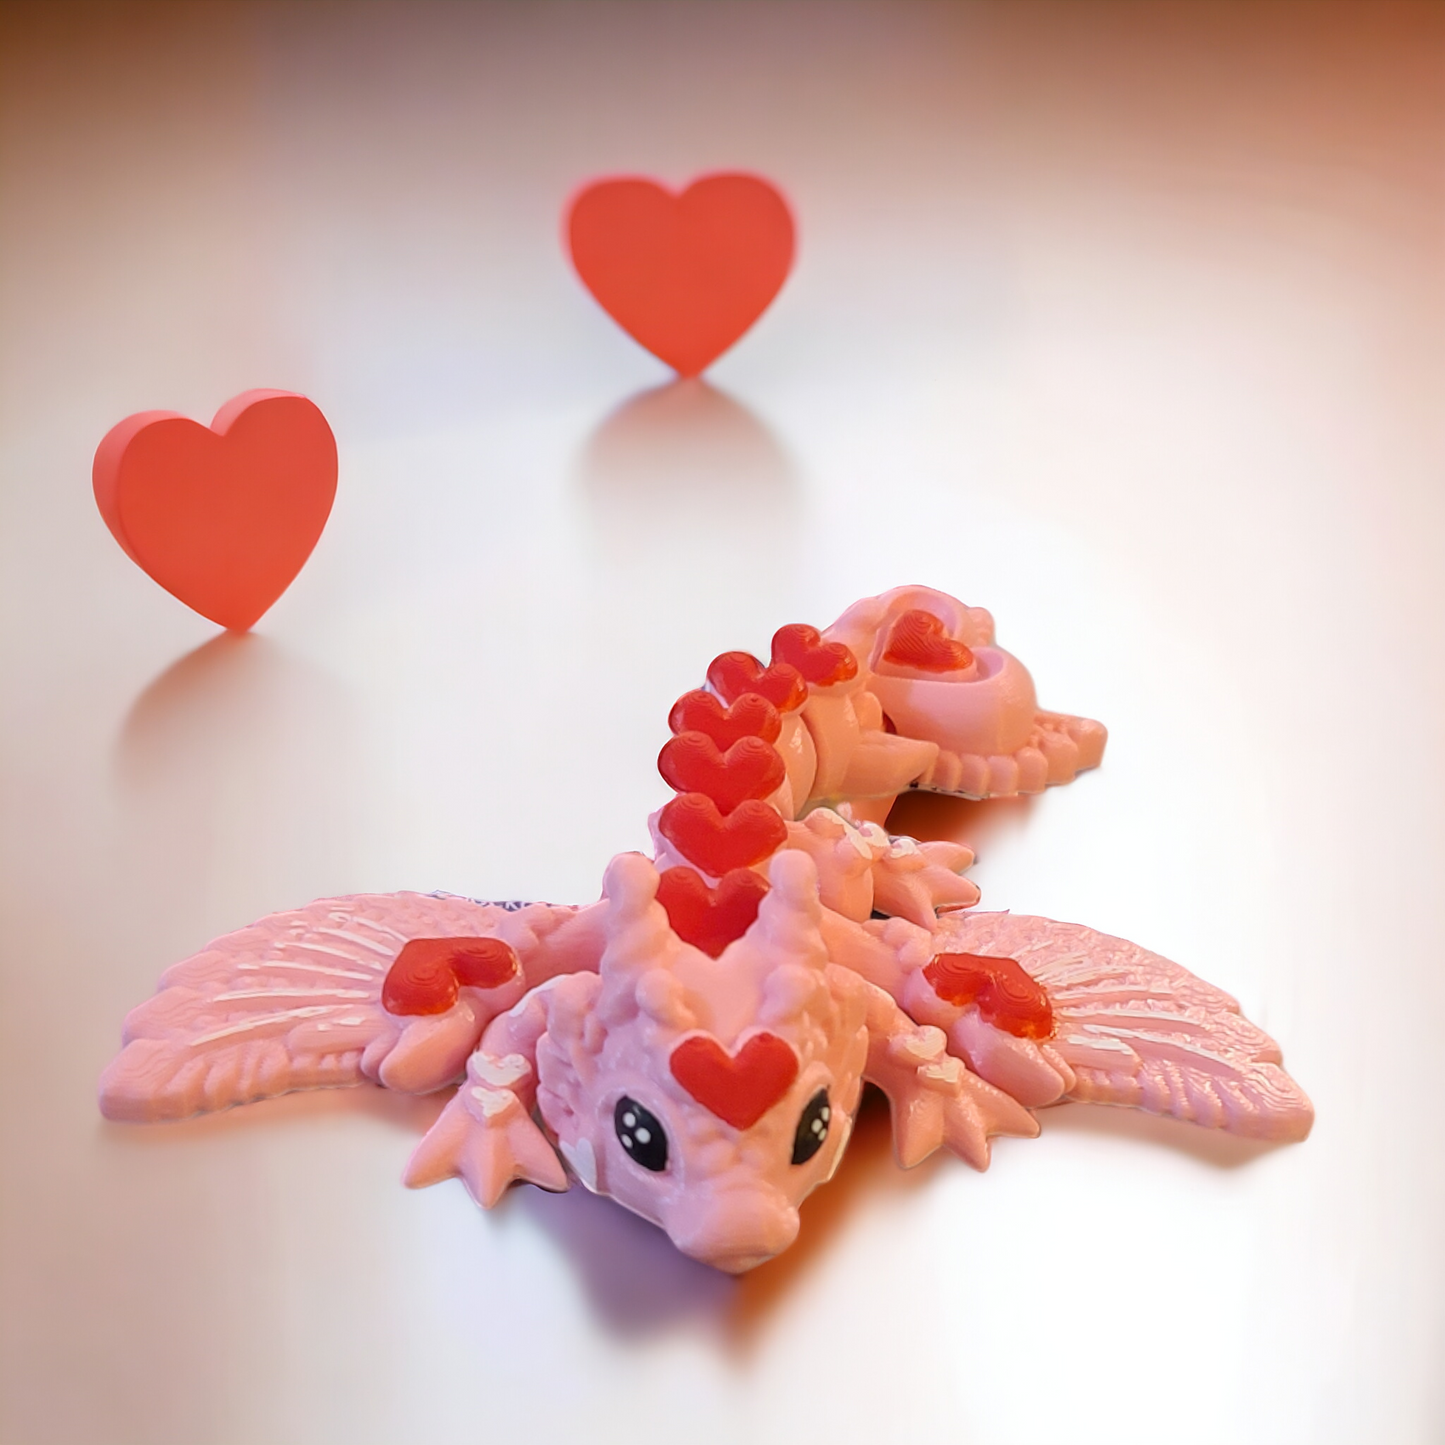 3d print, tiny heart dragon, love wyvern, Valentines Day, romantic gift, party favor, gift for her, fidget, wedding decor, love themed